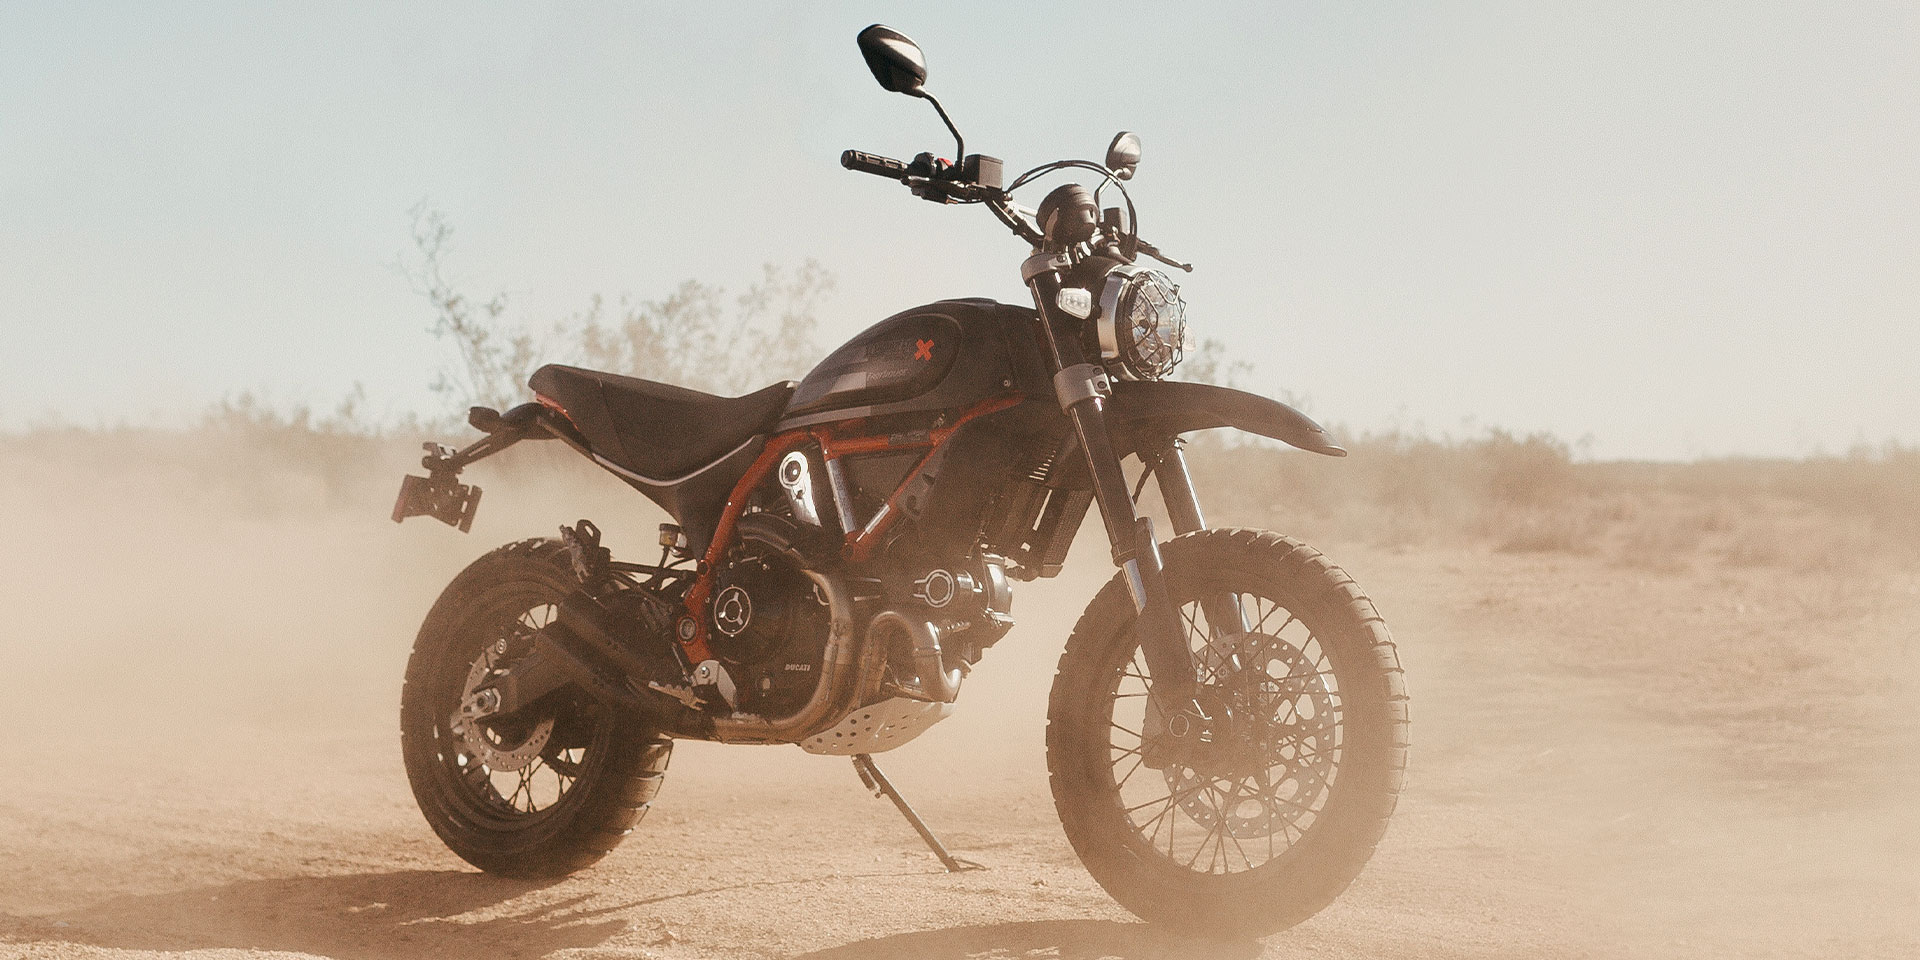 Desert Sled Fasthouse A Limited And Numbered Edition Of Ducati Scrambler To Celebrate Victory In The Mint 400